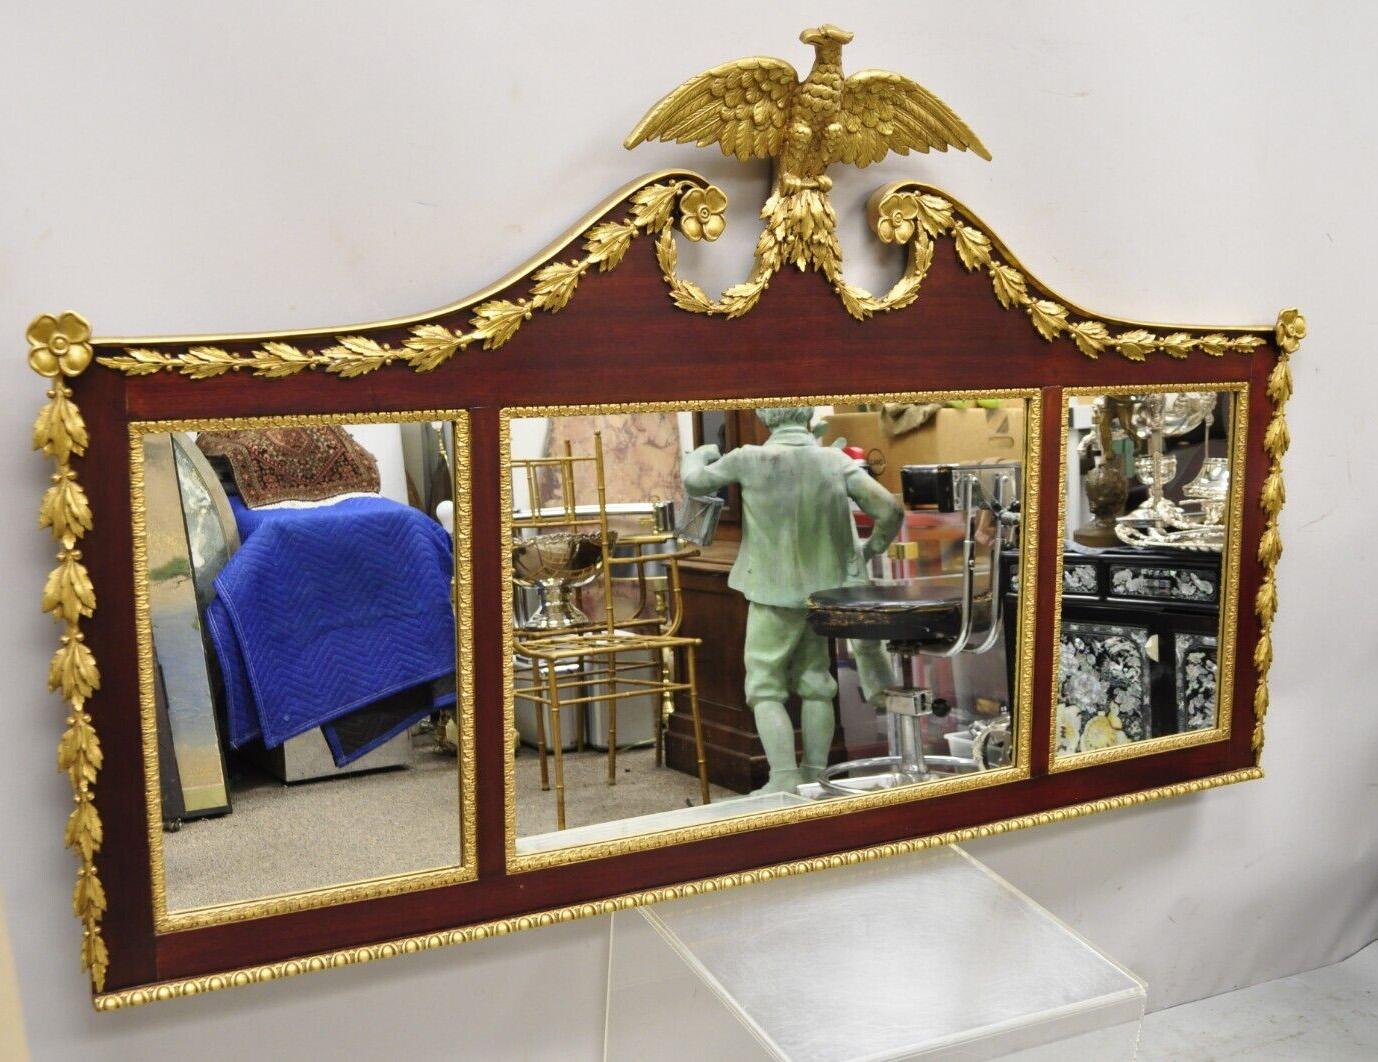 Antique American Federal gilt carved overmantle triple mirror with gold eagle. Item featured is an Impressive item, gold gold gilt carved eagle pediment, mahogany wood frame, triple mirror, gold gilt accents, very nice antique item, quality American